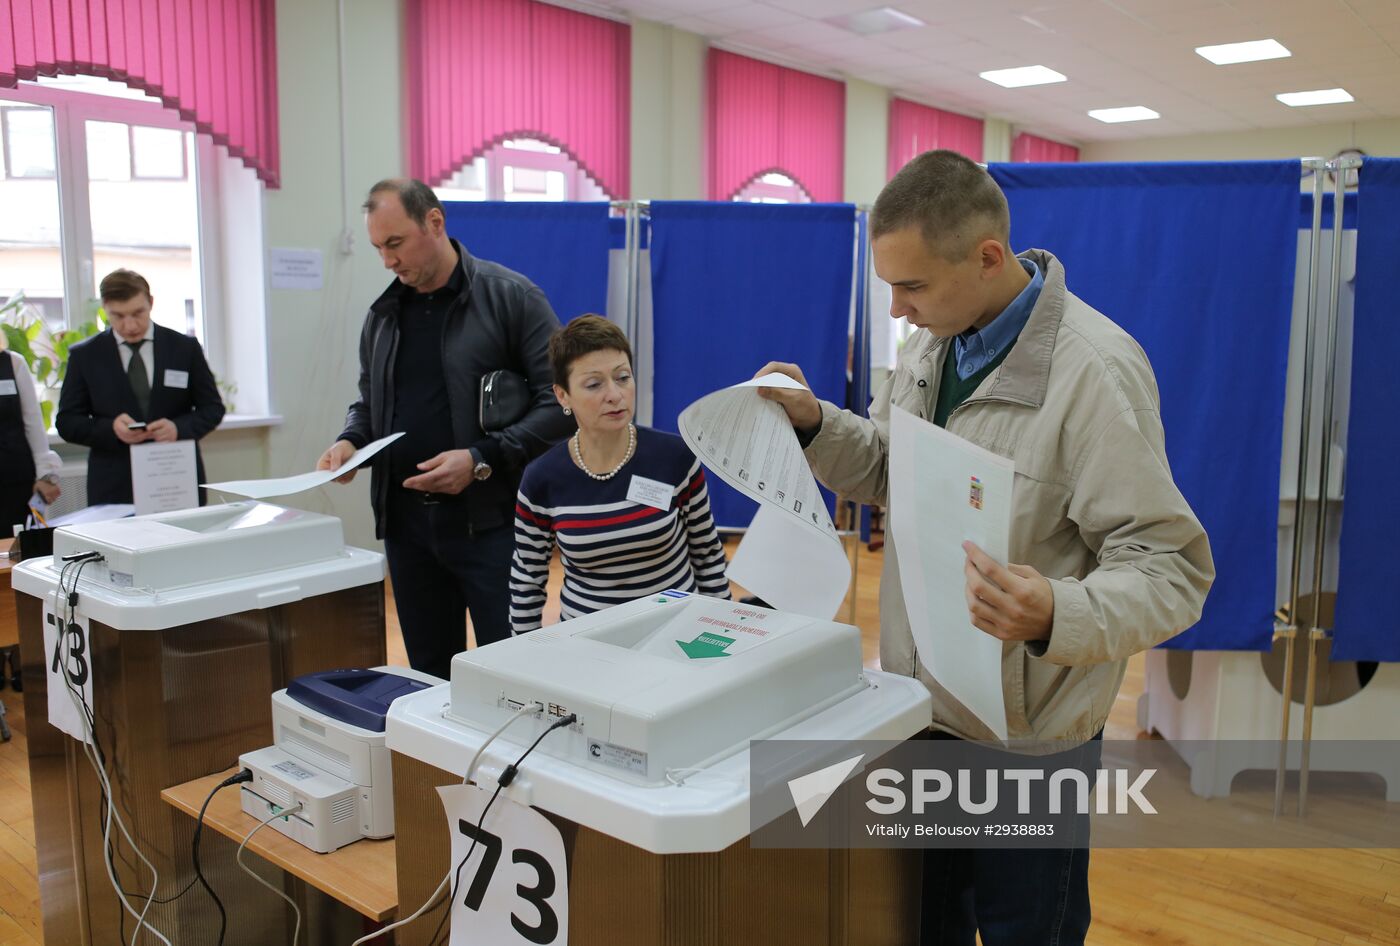 Unified election day in Moscow